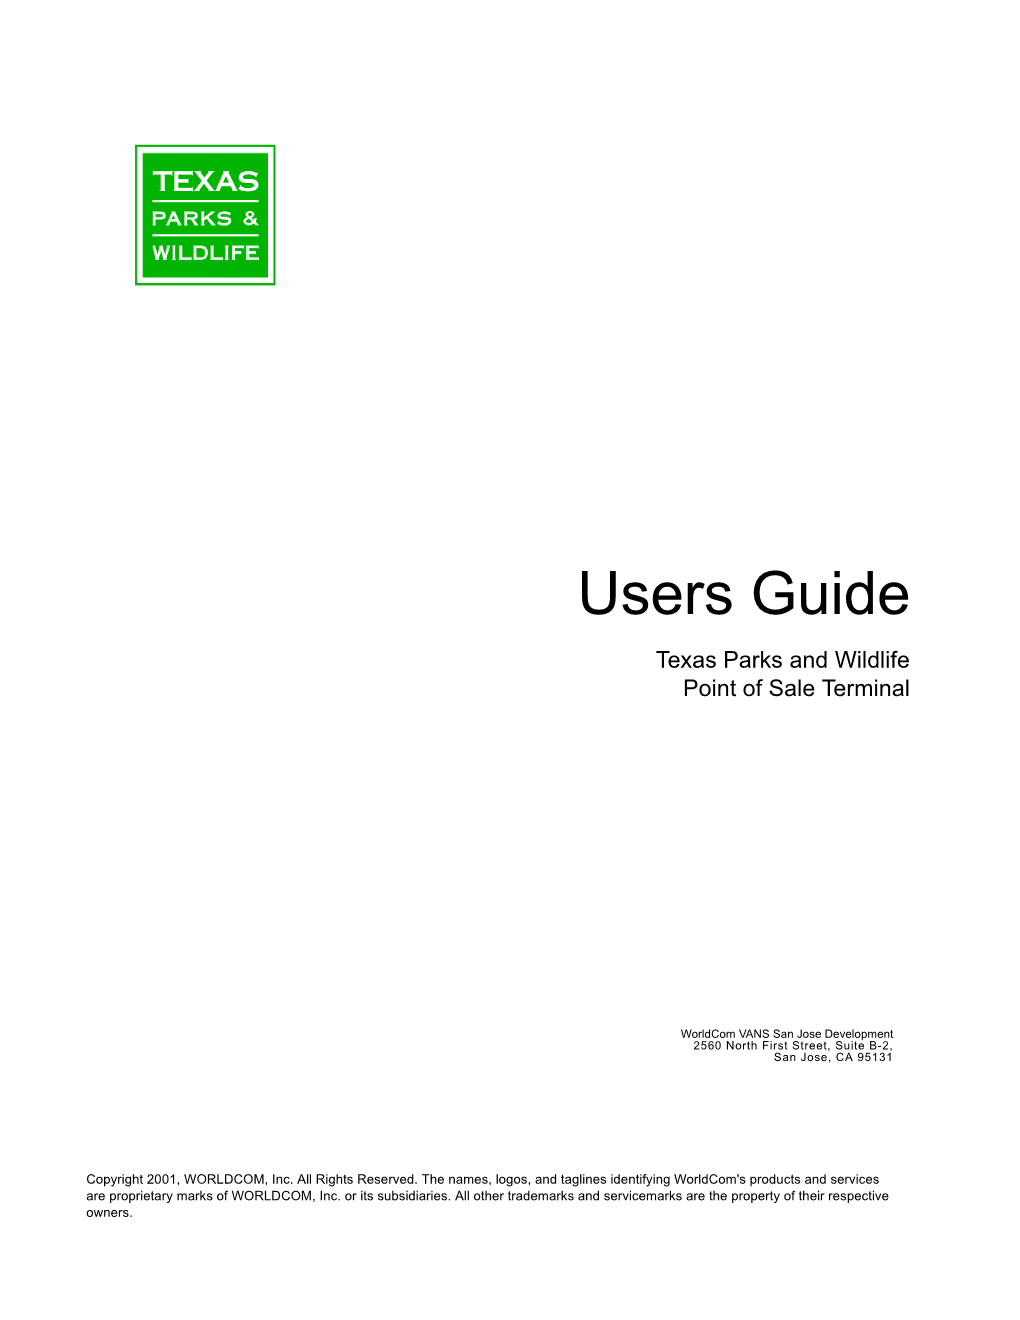 Users Guide Texas Parks and Wildlife Point of Sale Terminal